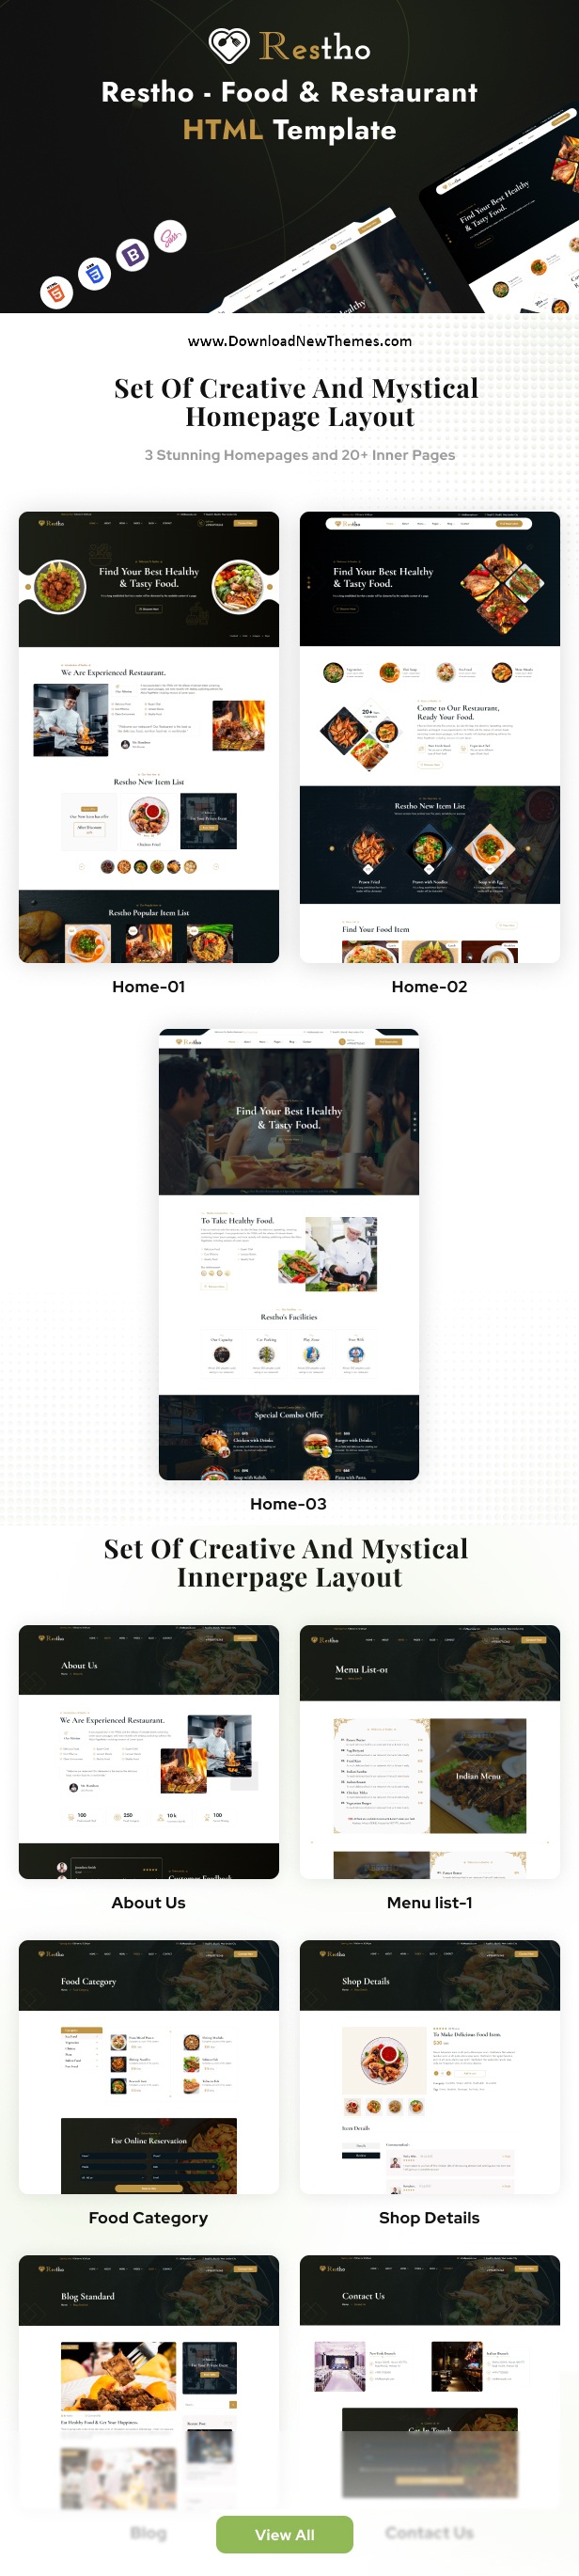 Restho – Restaurant and Cafe HTML Template Review